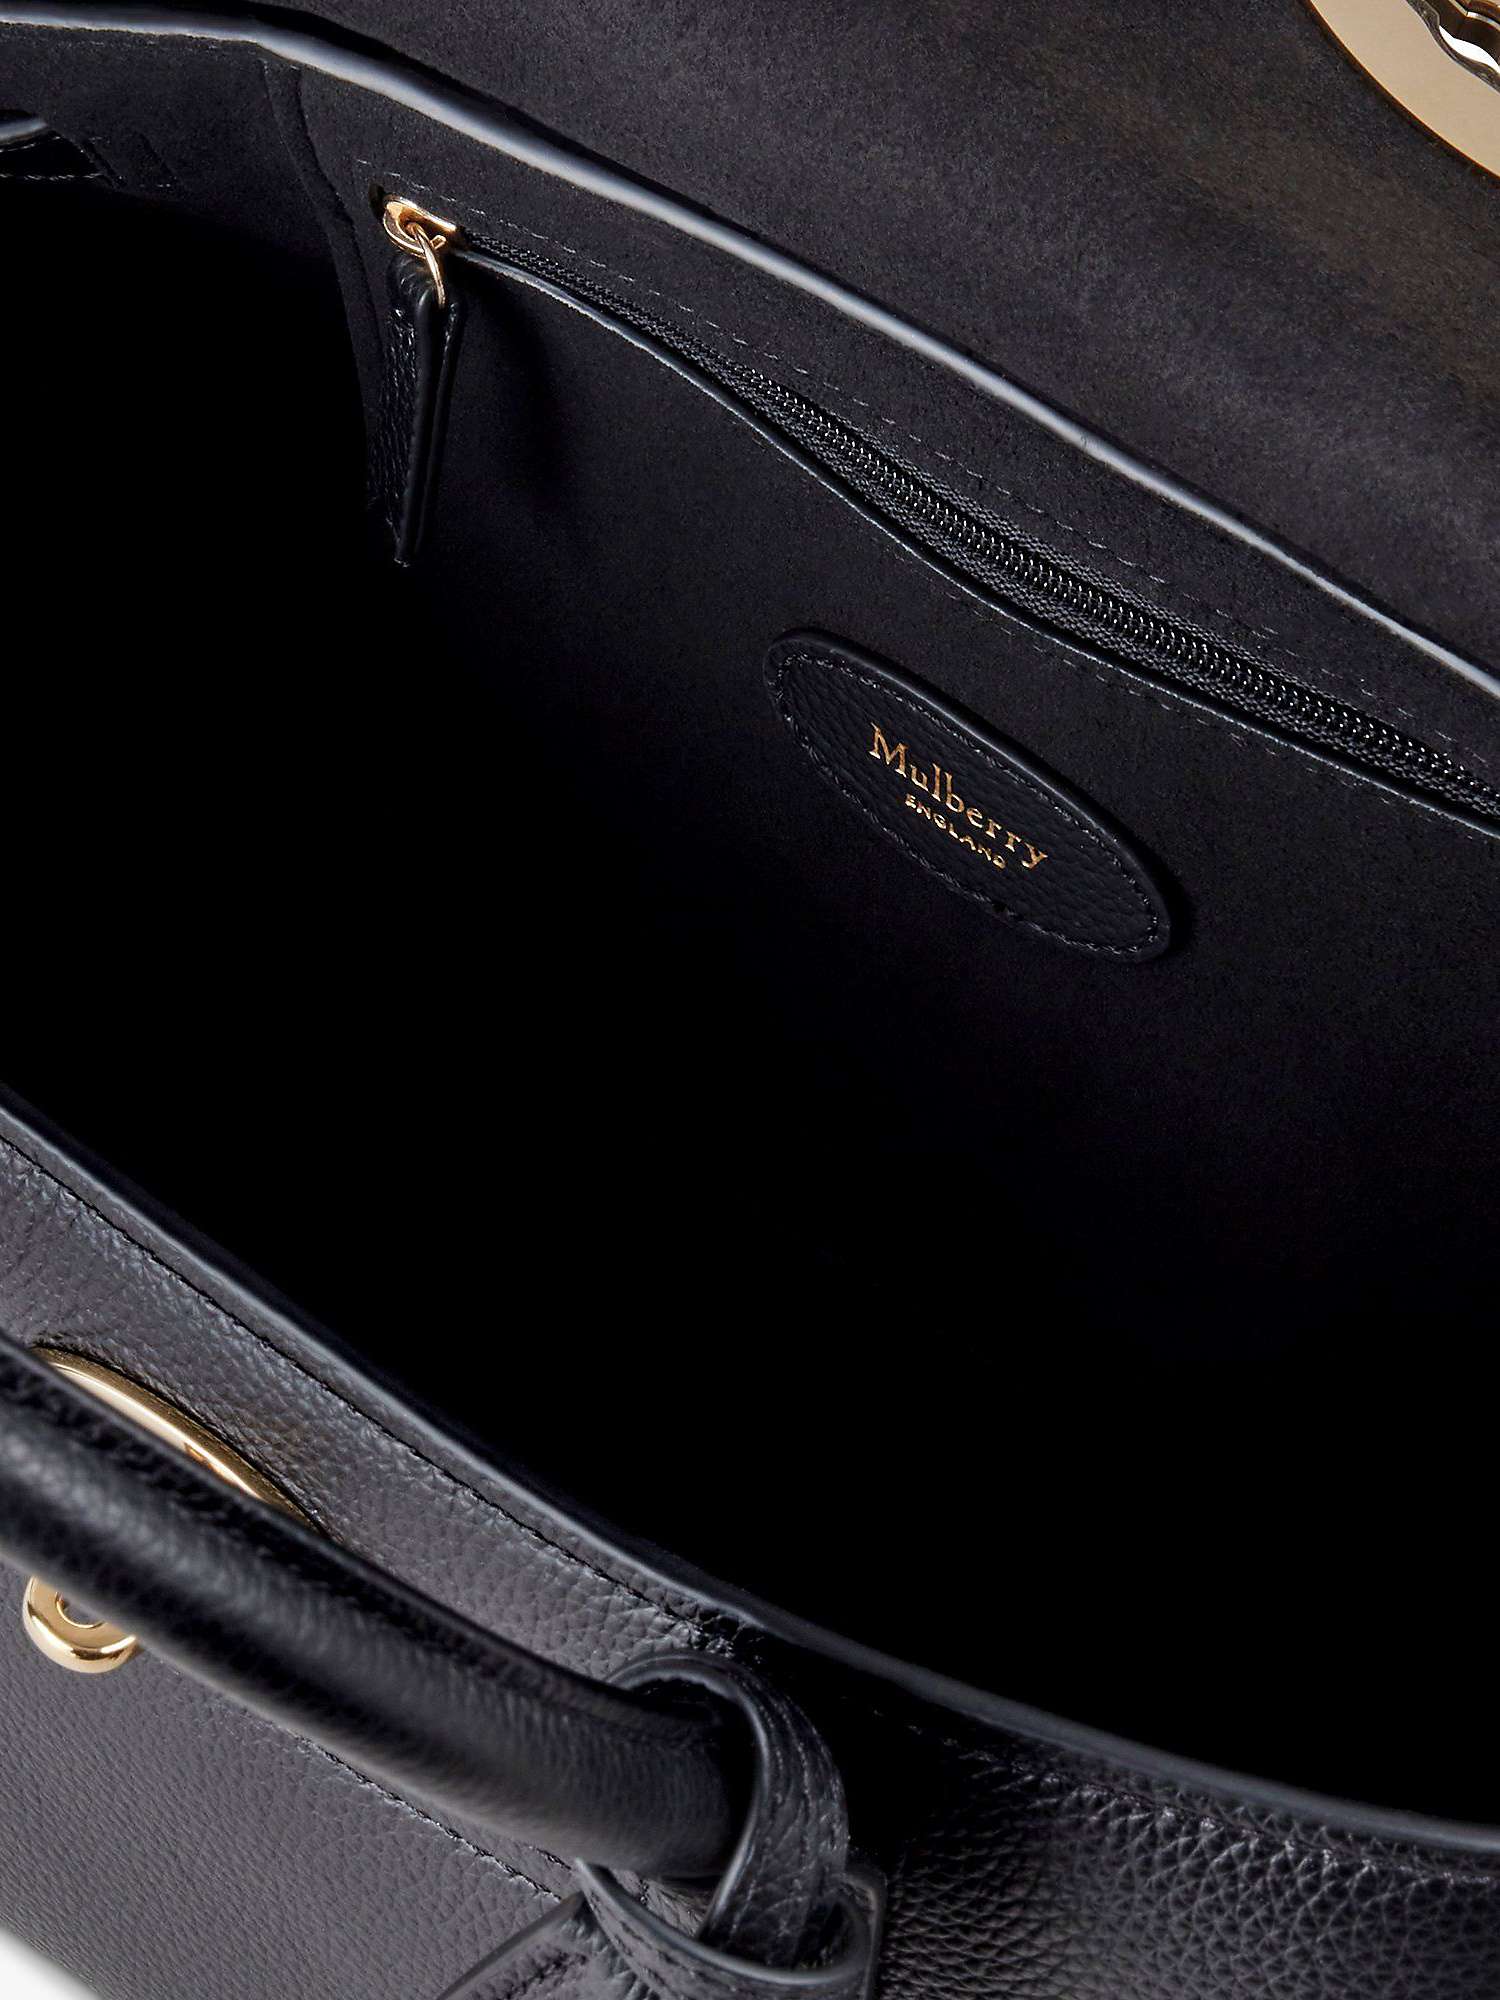 Buy Mulberry Bayswater Small Classic Grain Leather Satchel, Black Online at johnlewis.com